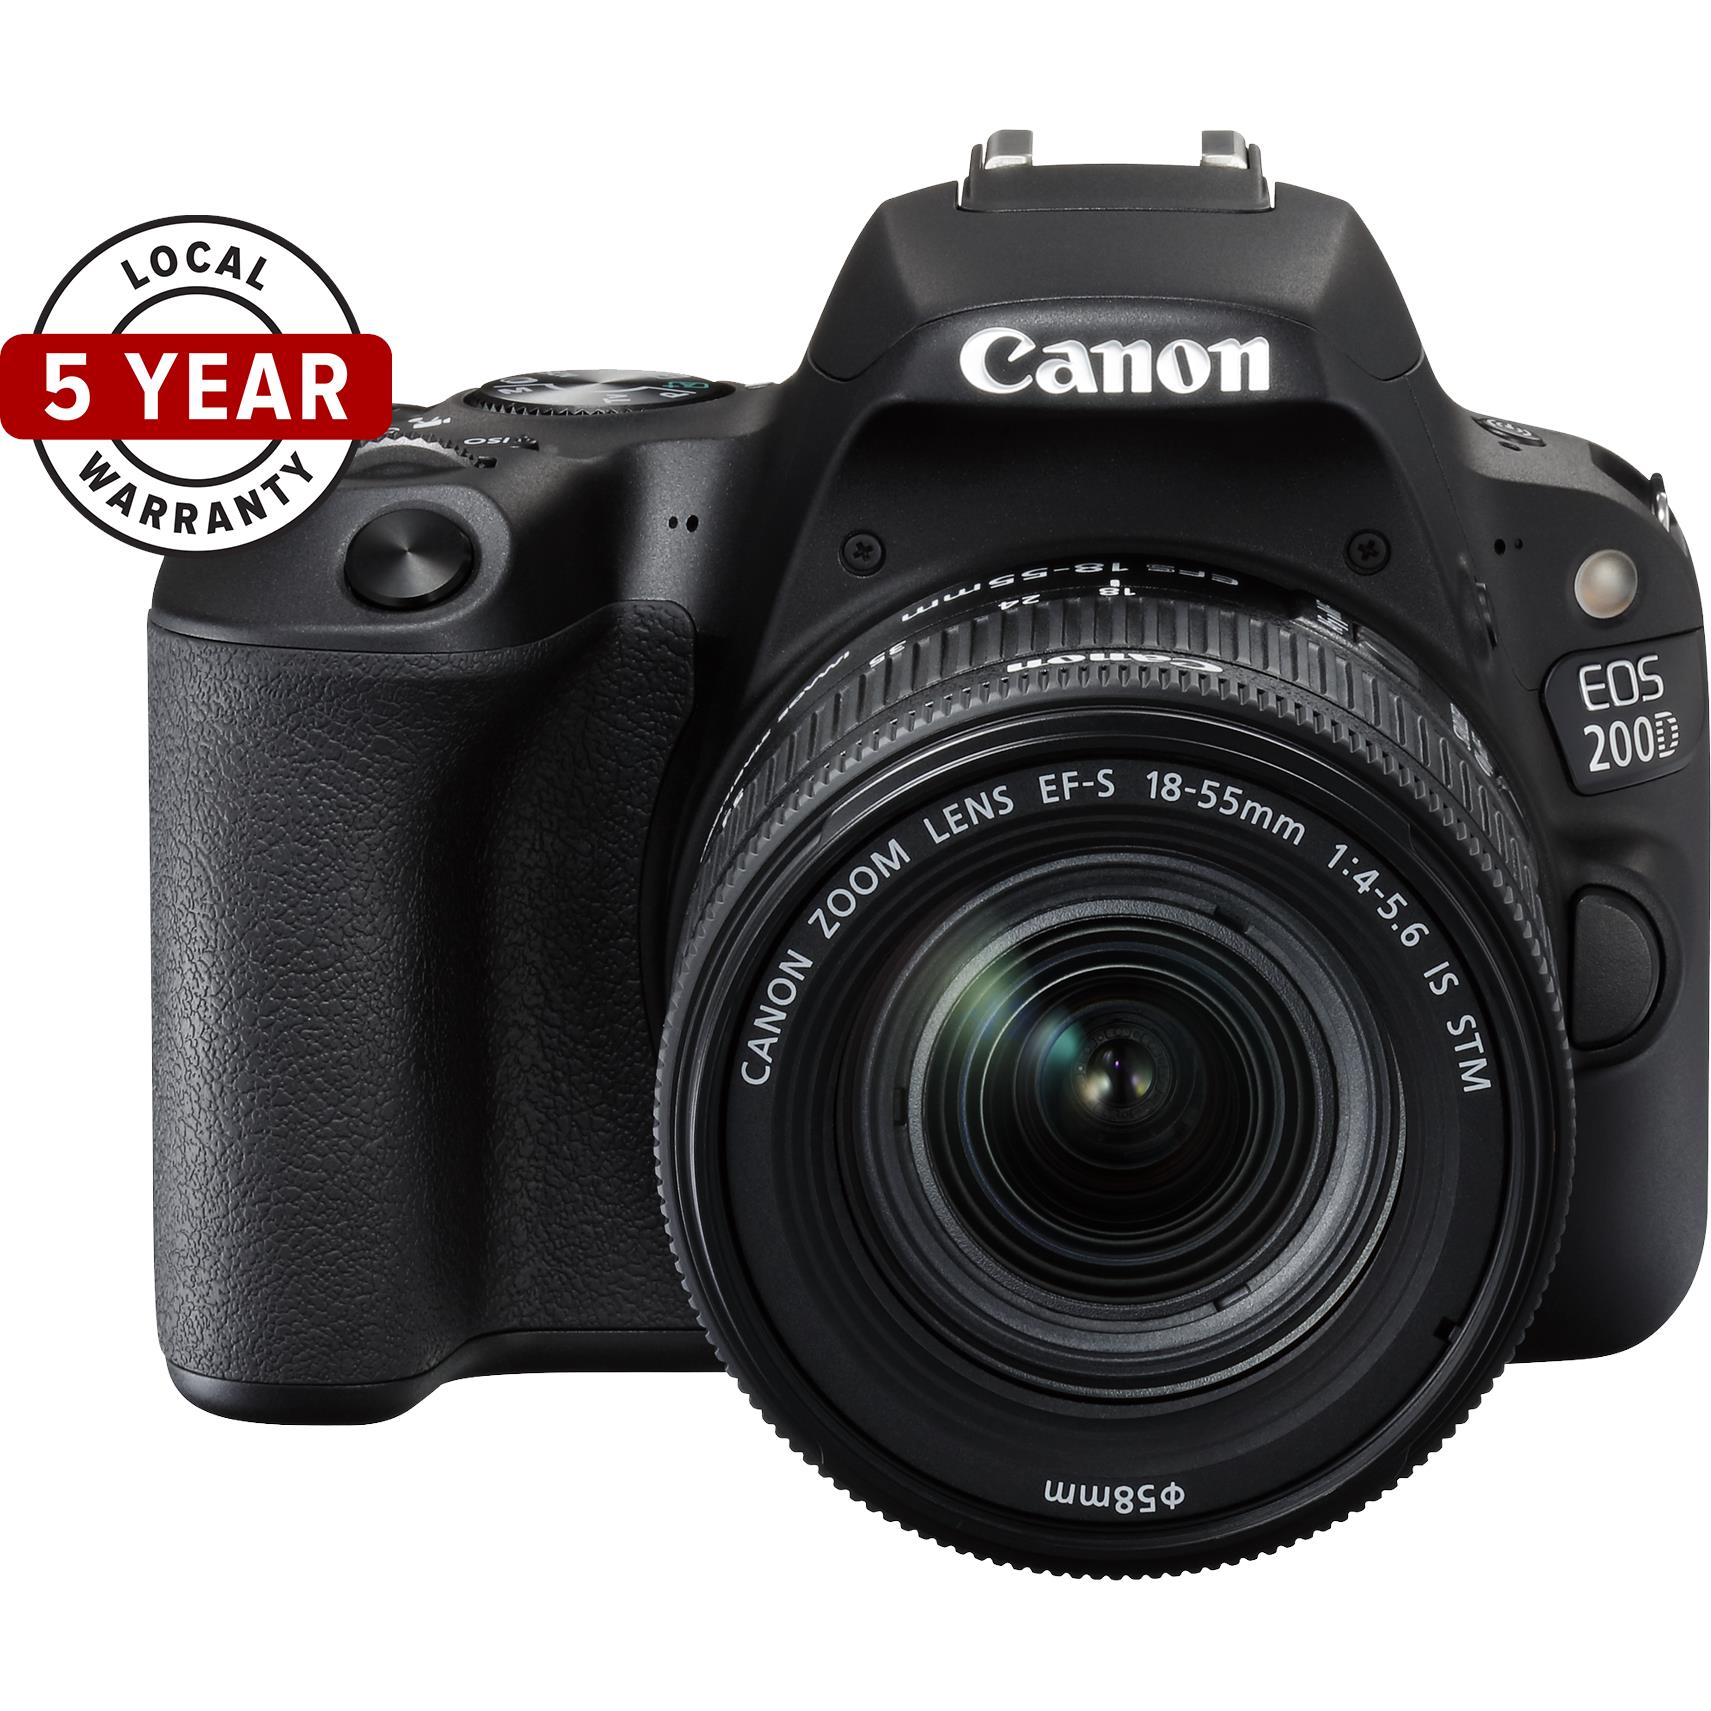 canon eos 200d ii dslr with 18-55mm lens [4k video]